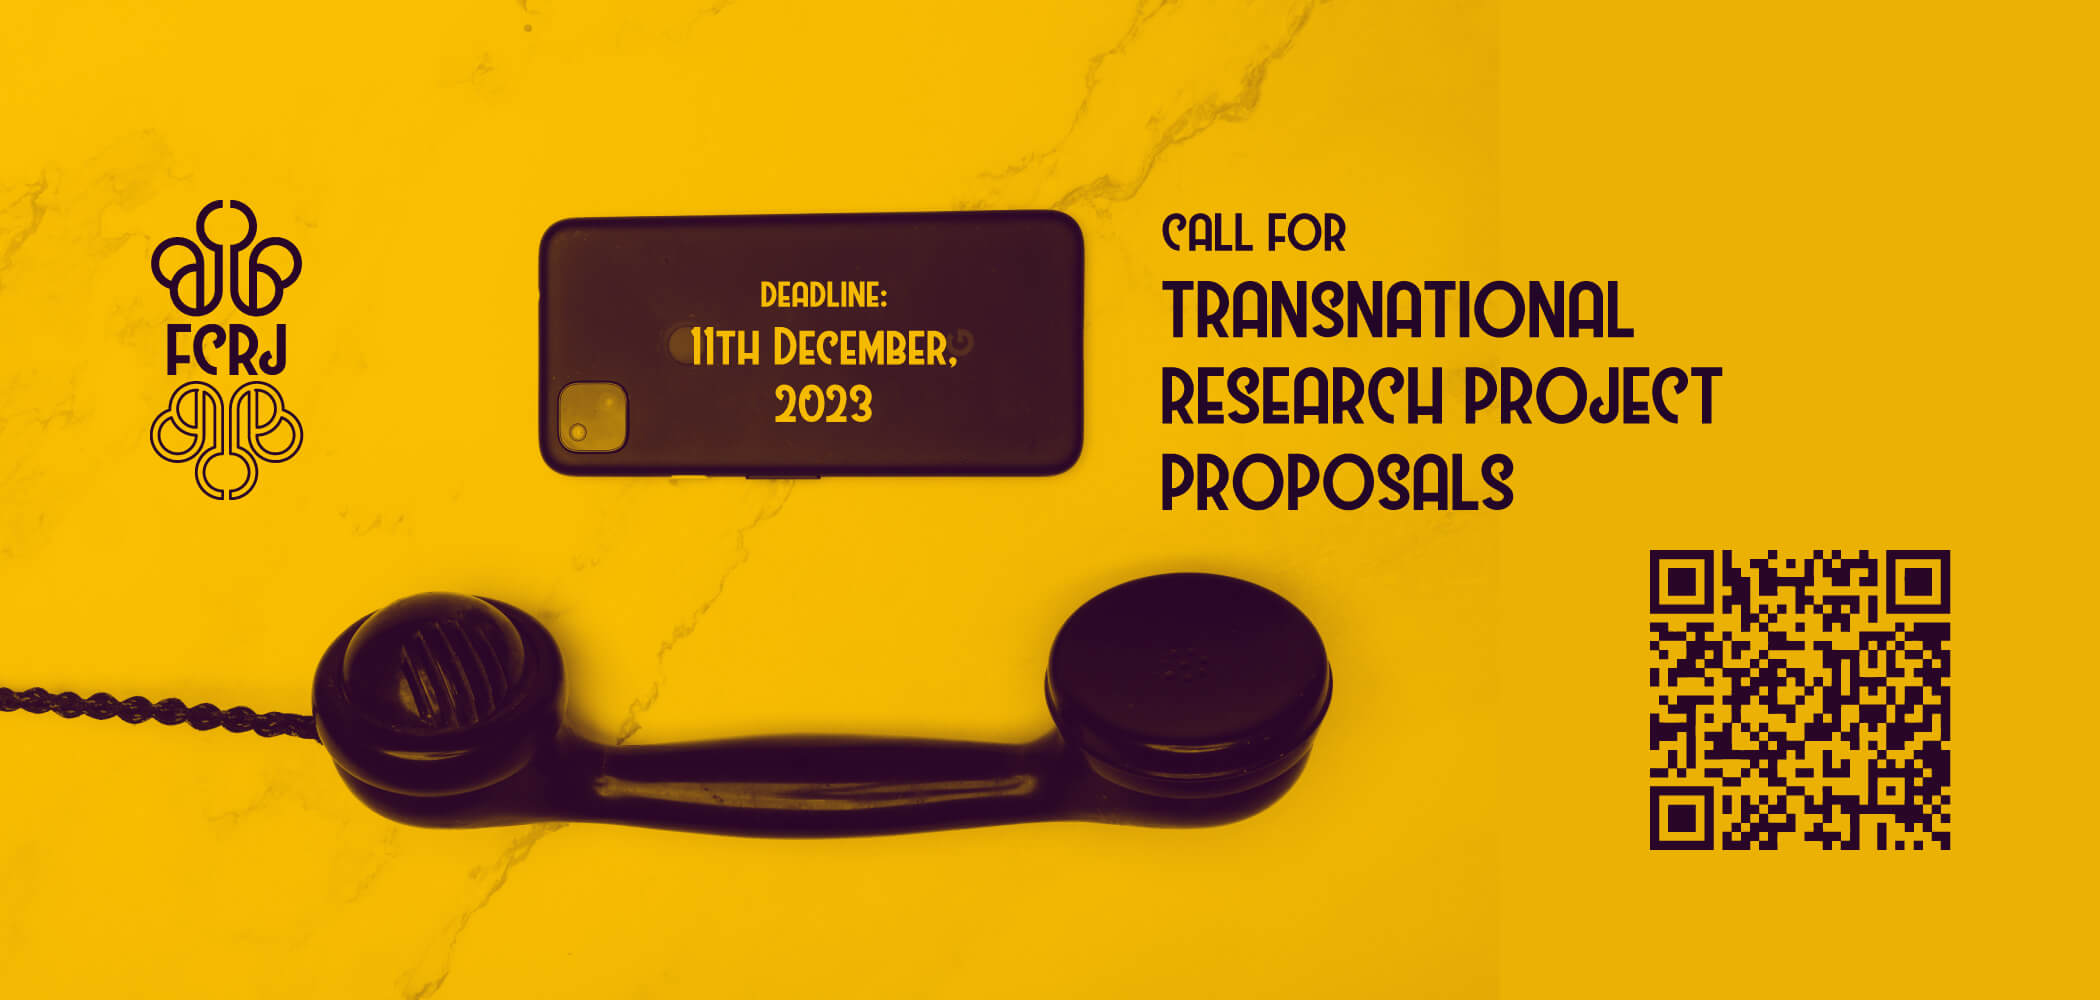 CALL FOR TRANSNATIONAL RESEARCH PROJECT PROPOSALS